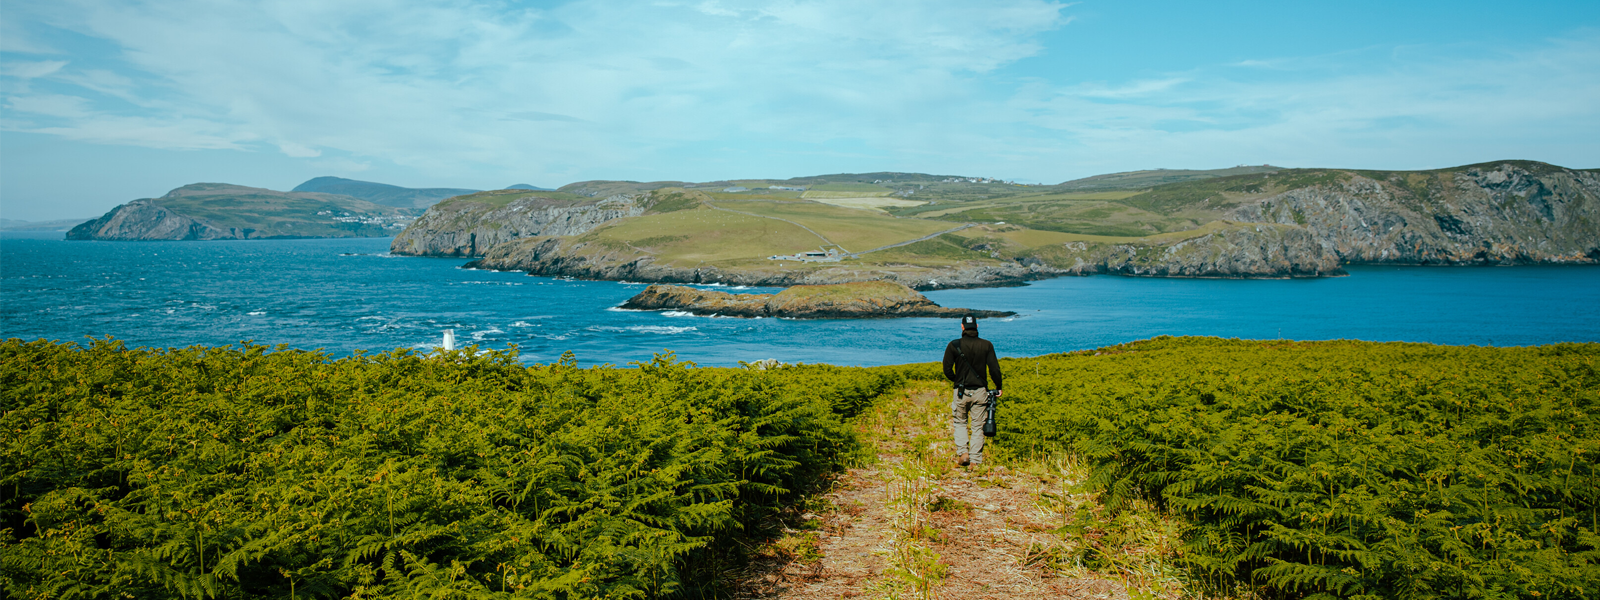 Man on a nature holiday on the Isle of Man. He's walking through ferns towards a cliff edge with his back to the camera. He holds a camera and views of the Calf of Man stretch out in front of him.